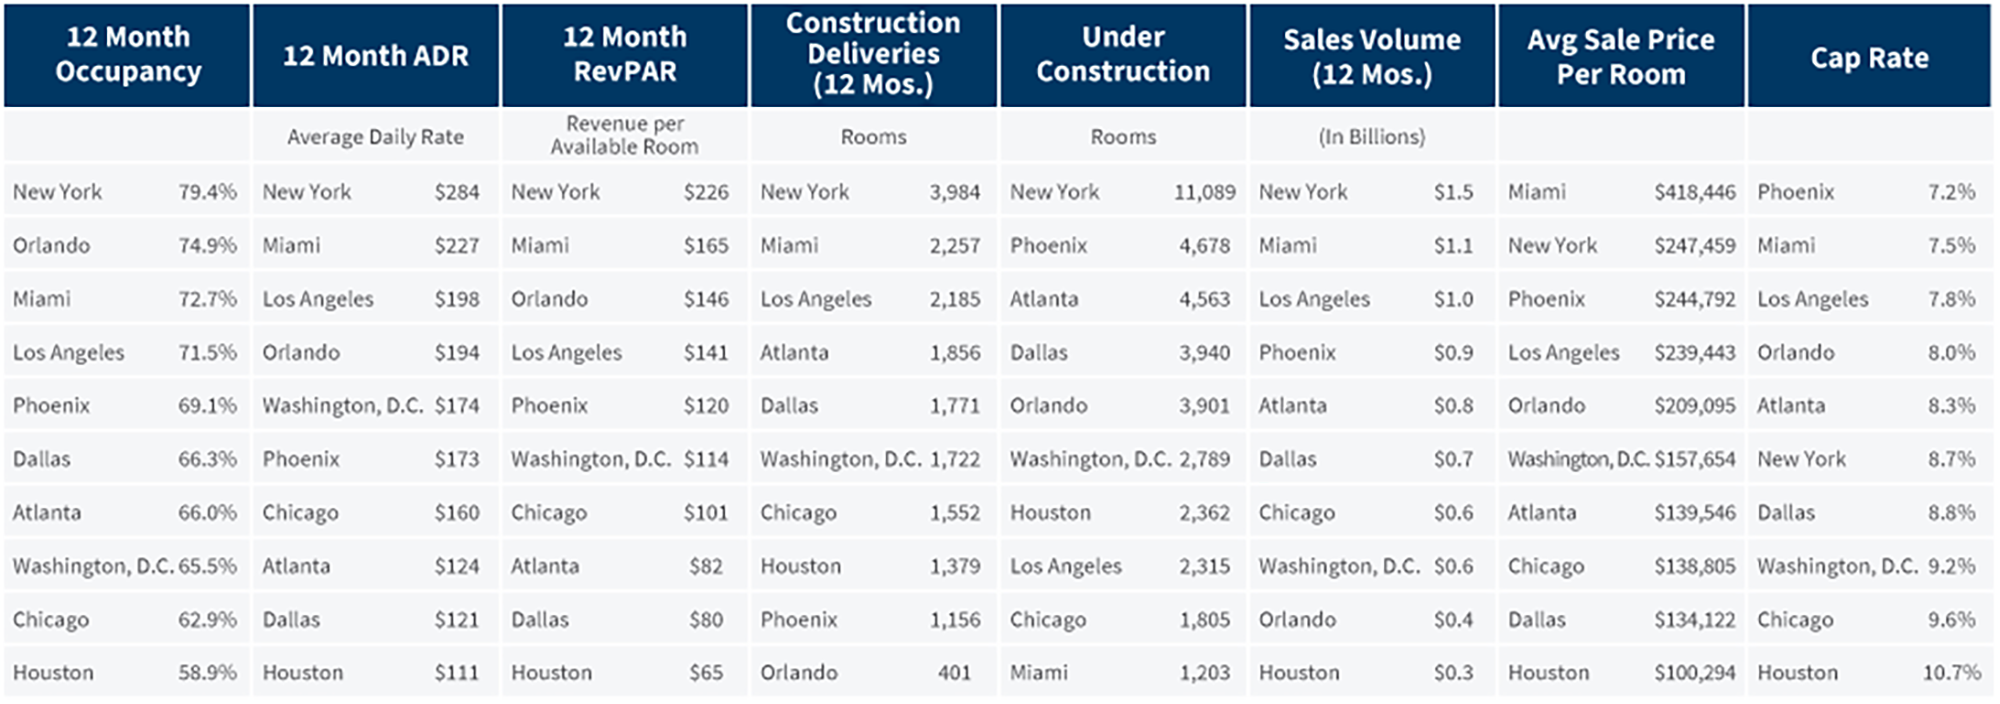 10 Largest Hotel Markets (by Inventory) Comparison